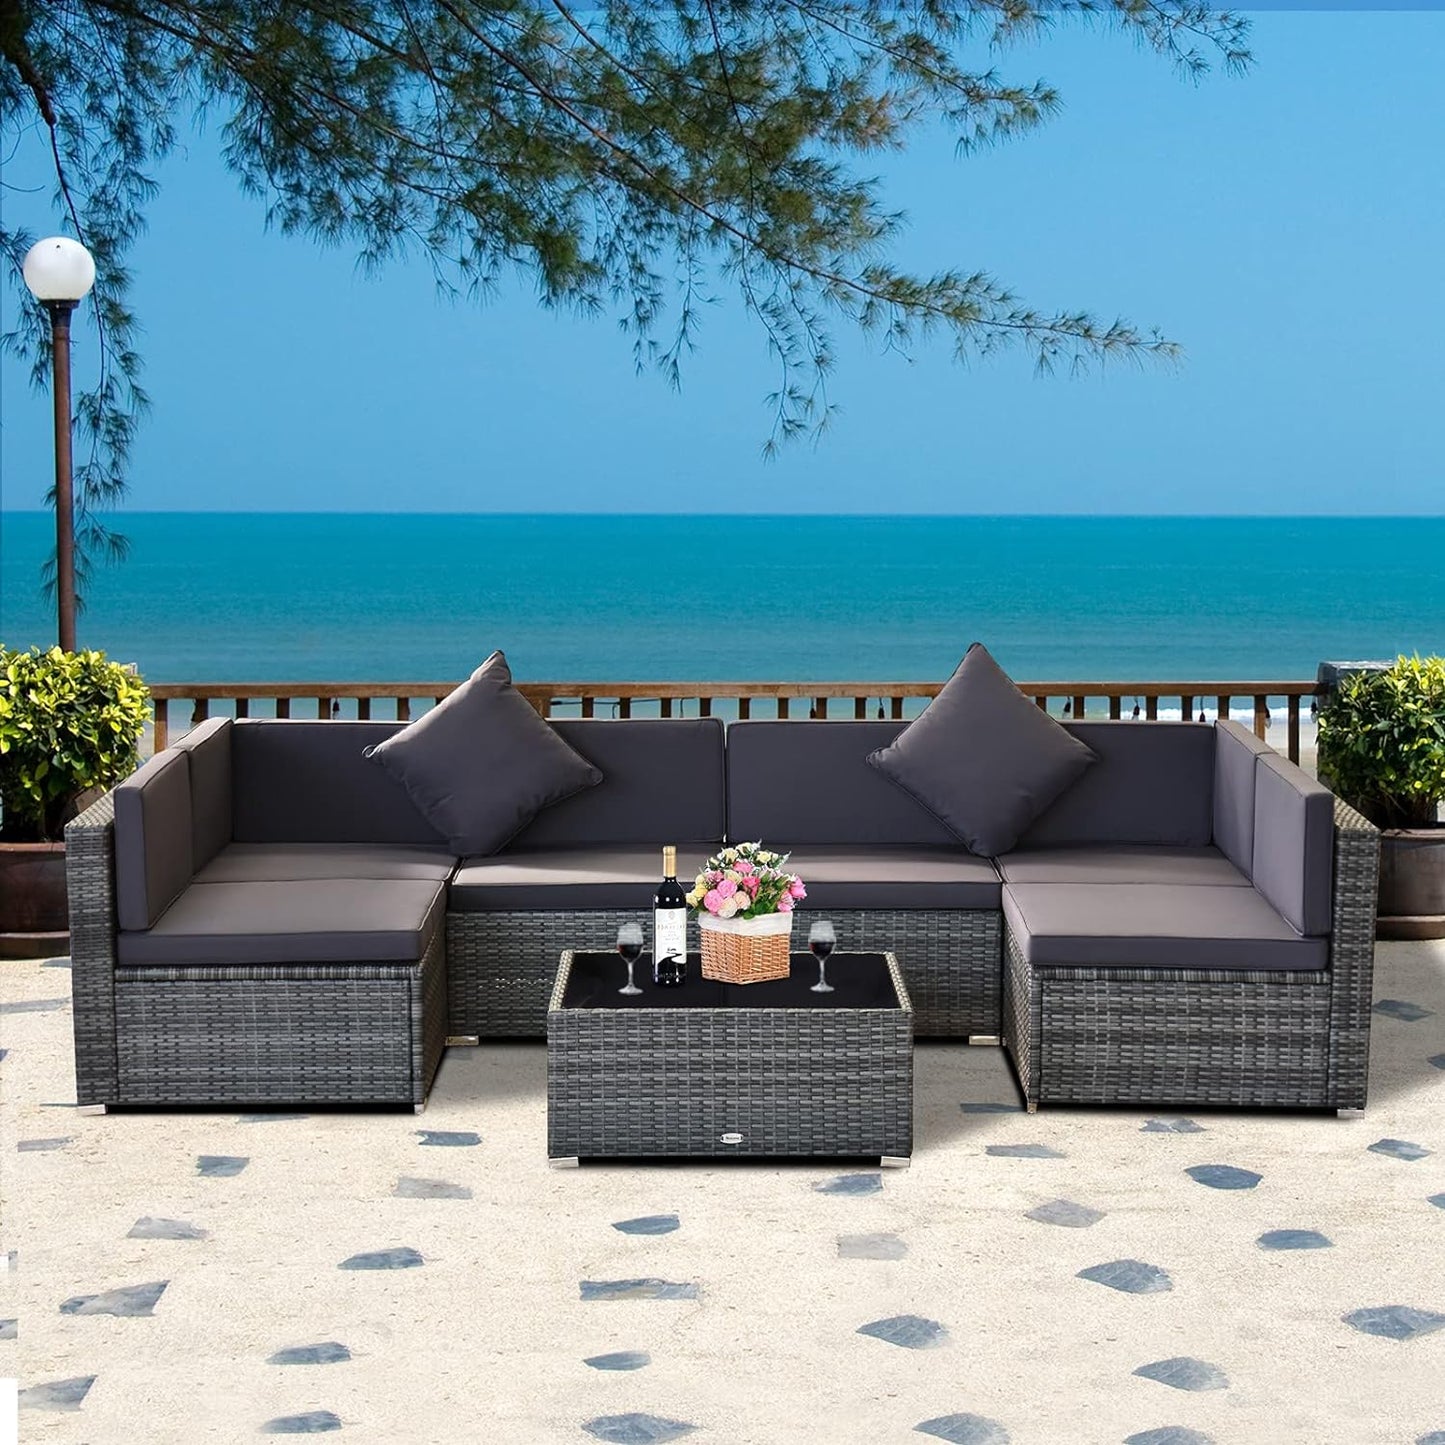 7 Piece Patio Furniture Set, PE Rattan Outdoor Conversation Set with Sectional Sofa, Glass Tabletop, Cushions and Pillows for Garden, Lawn, Deck, Grey and Dark Grey